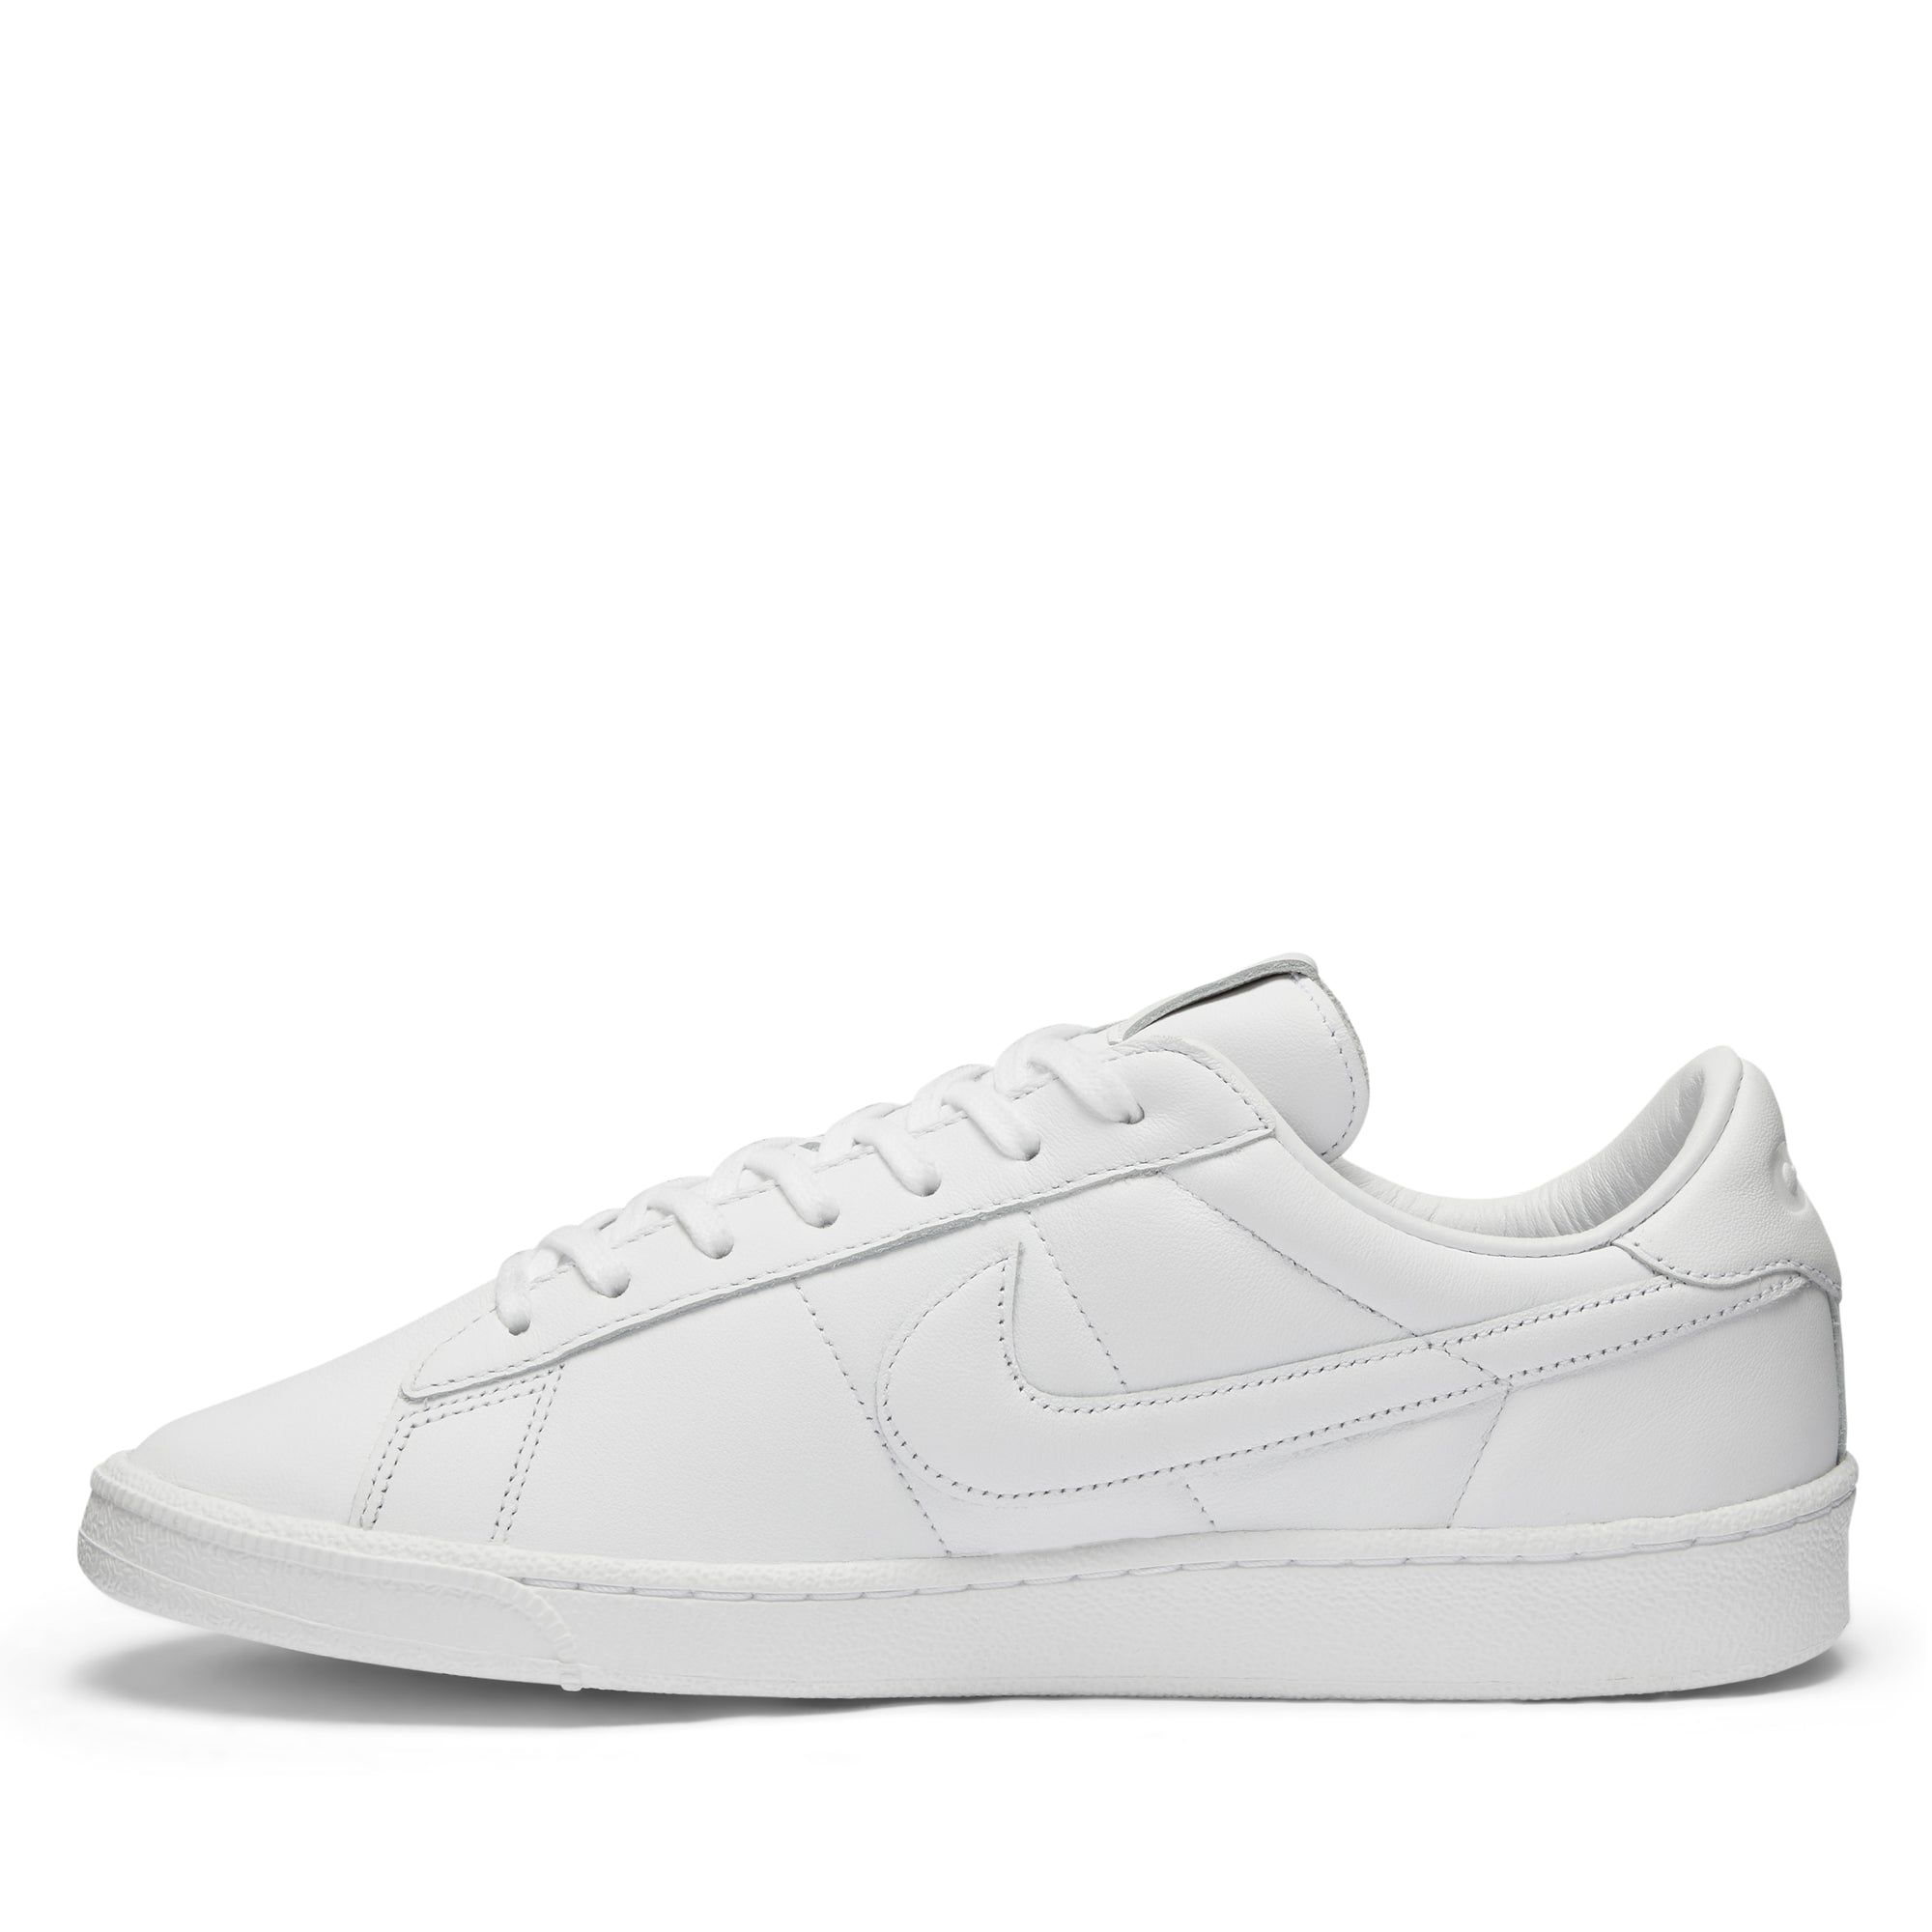 Cdg Black Collection - Nike Tennis Classic - (2) | Dover Street Market ...